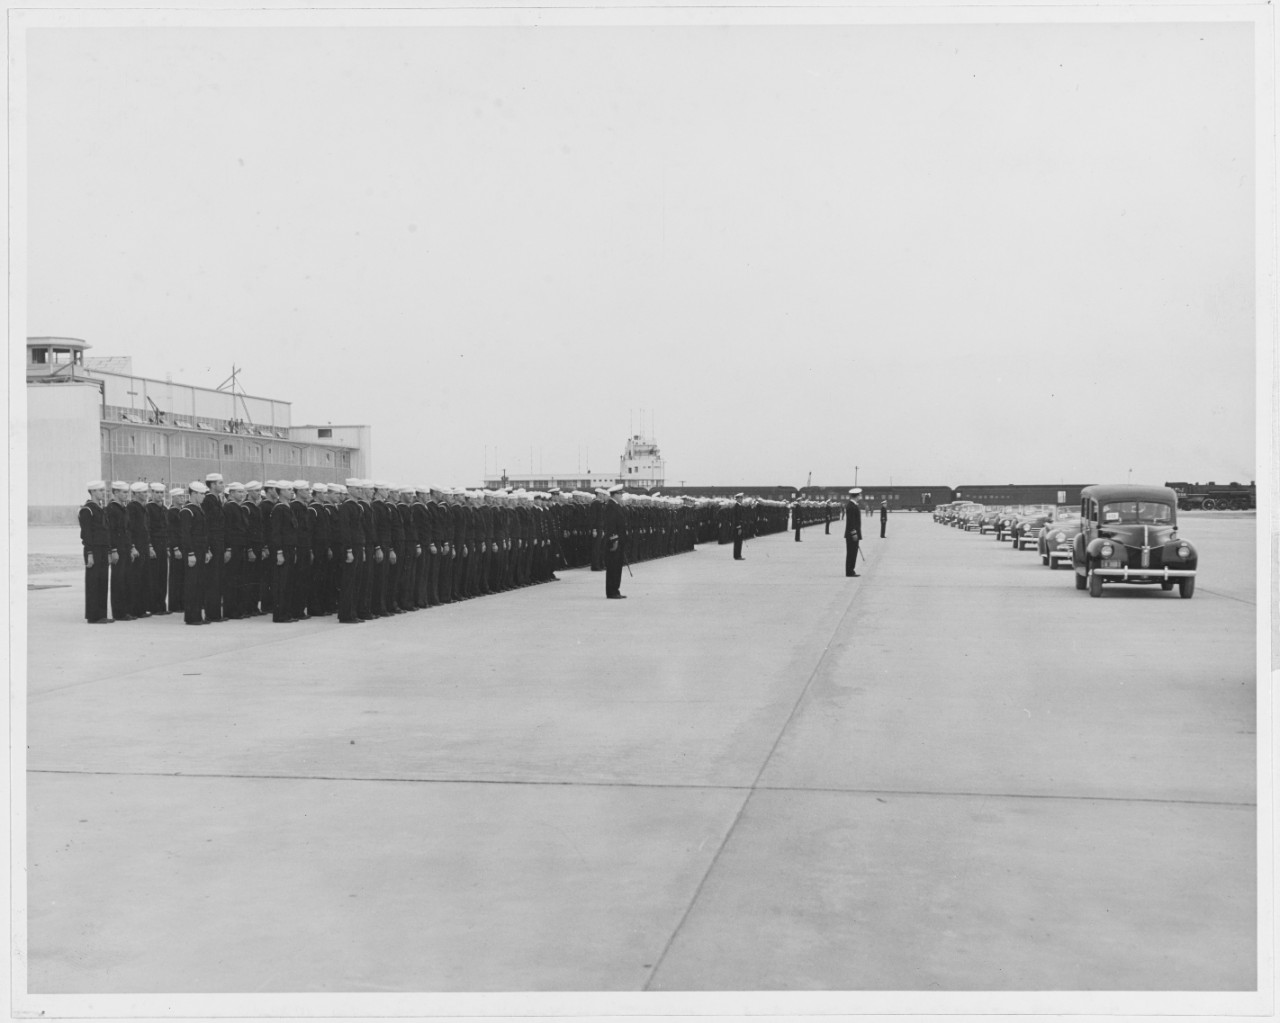 Personnel of U.S. Naval Air Station, Jacksonville, Florida, being inspected by President F.D. Roosevelt. March 20, 1941